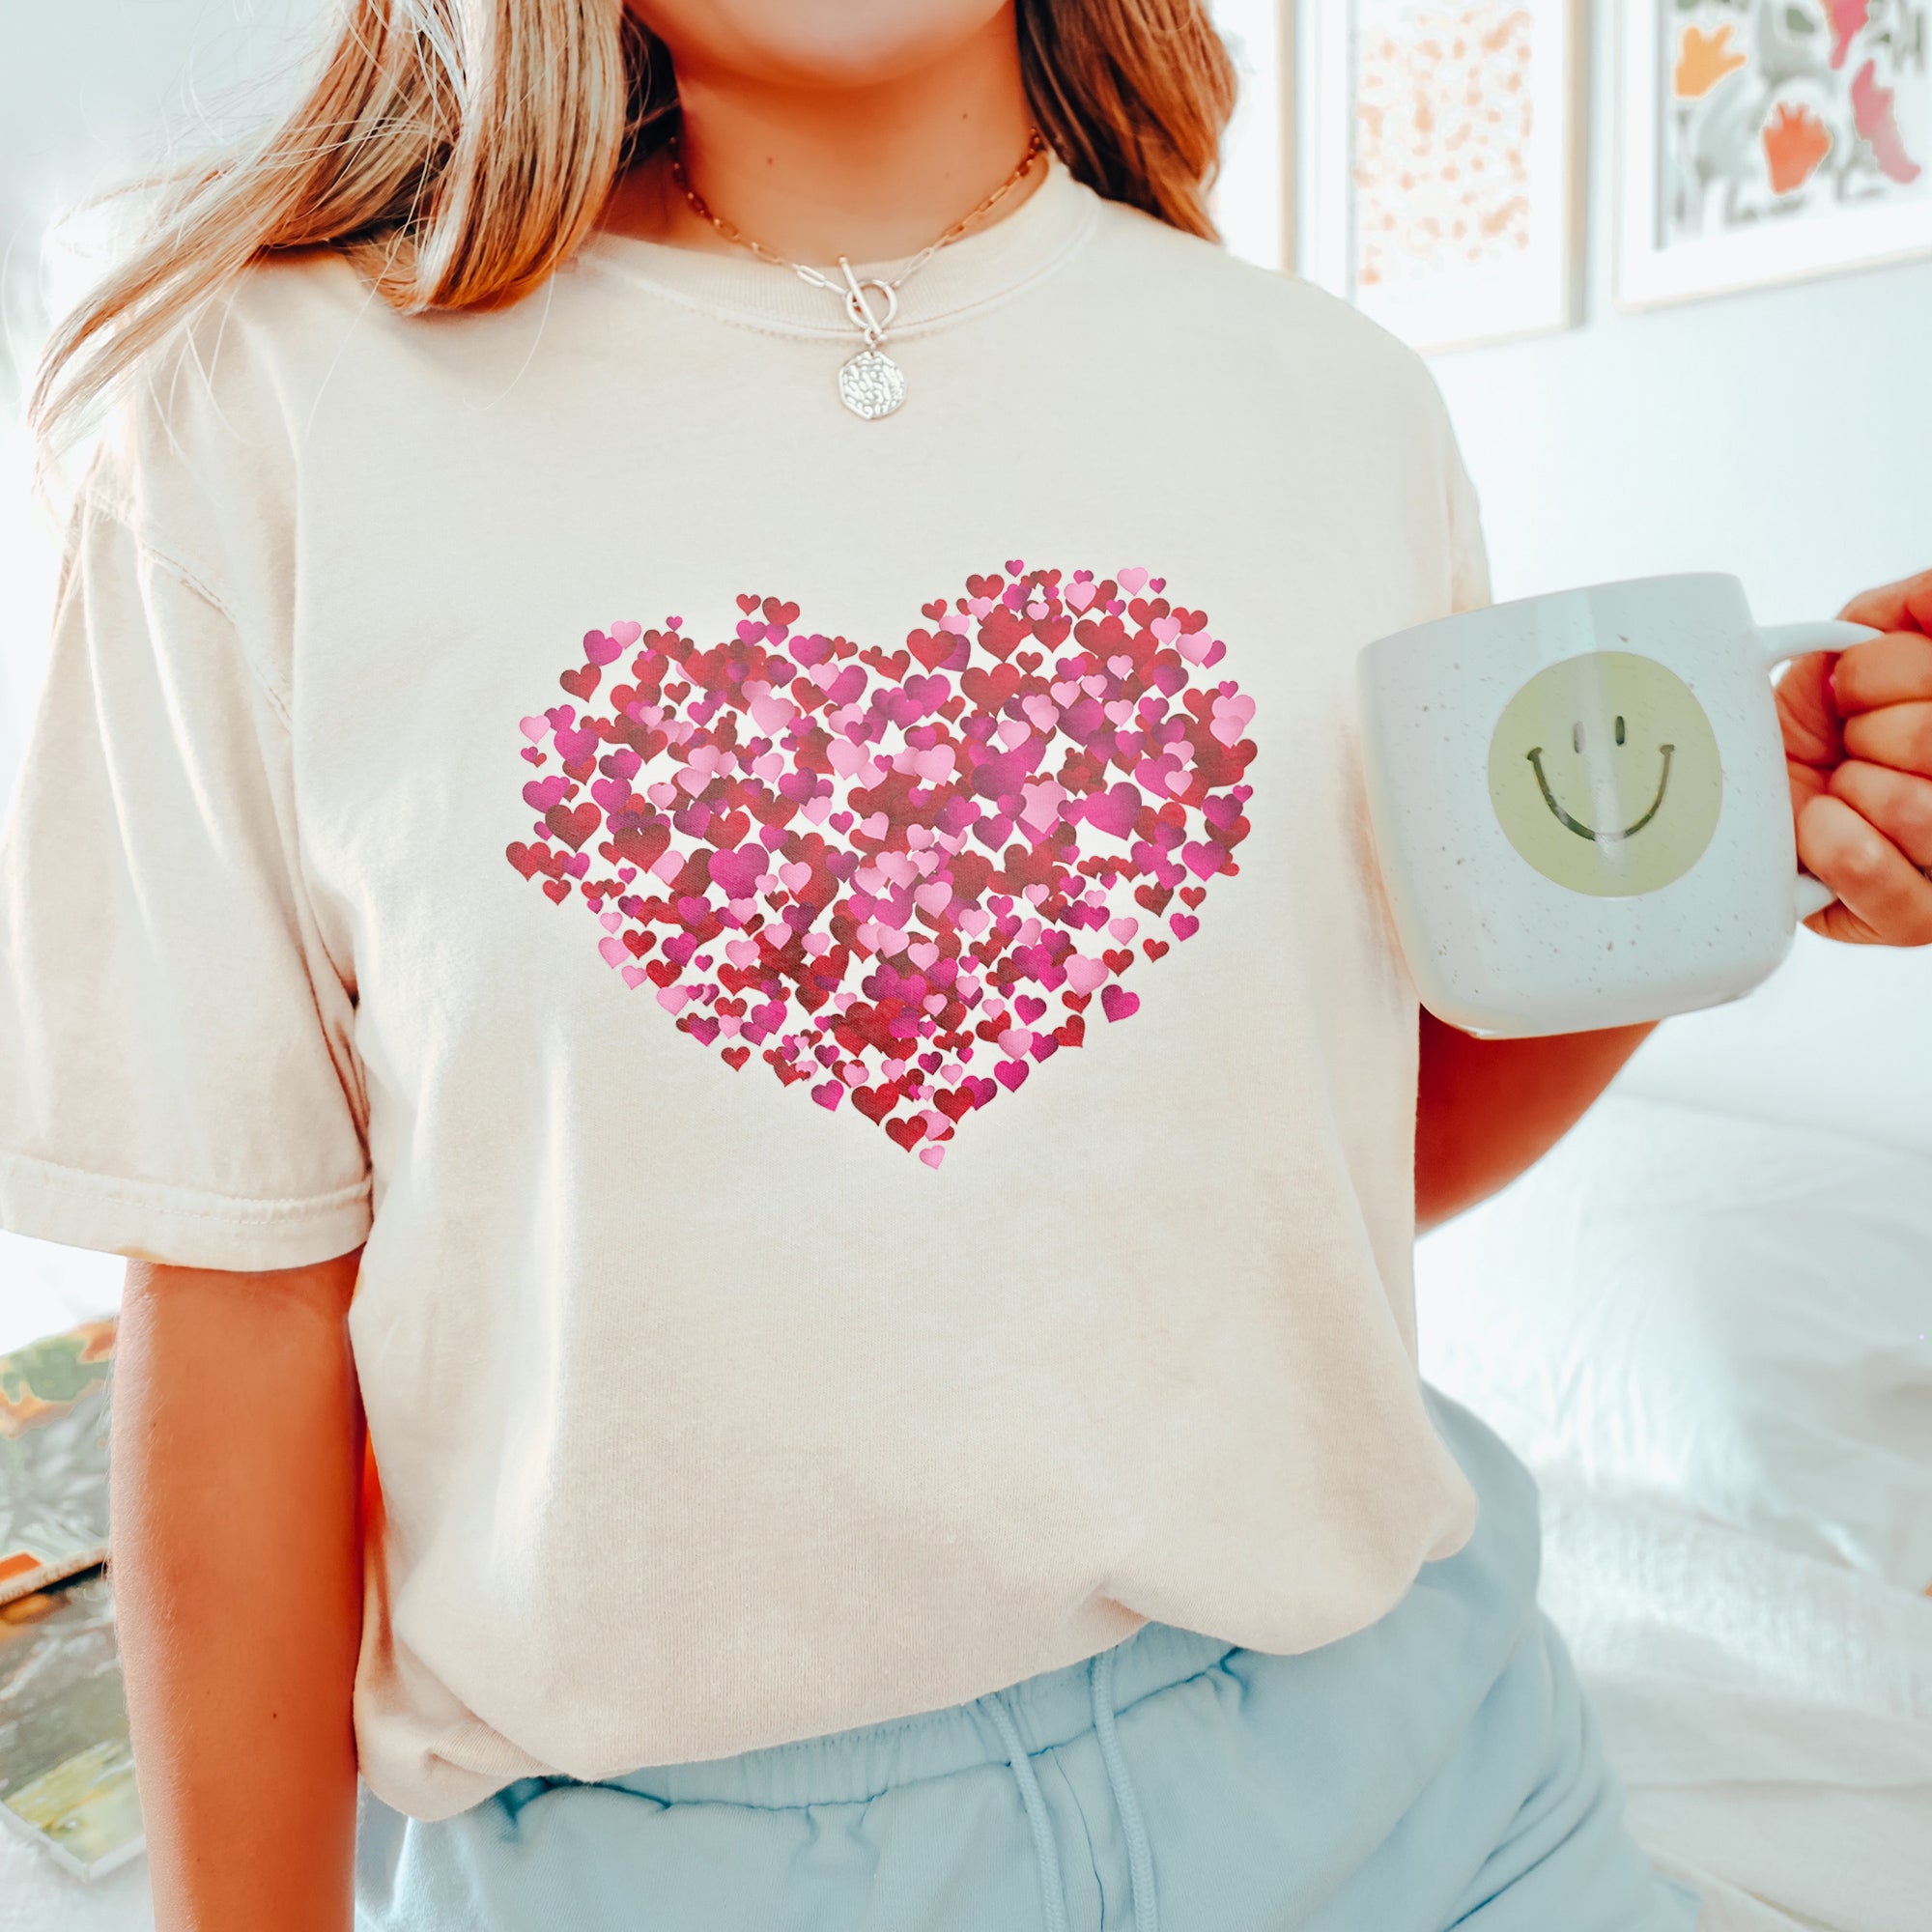 Floating Heart Valentines Shirt Garment-Dyed Tee